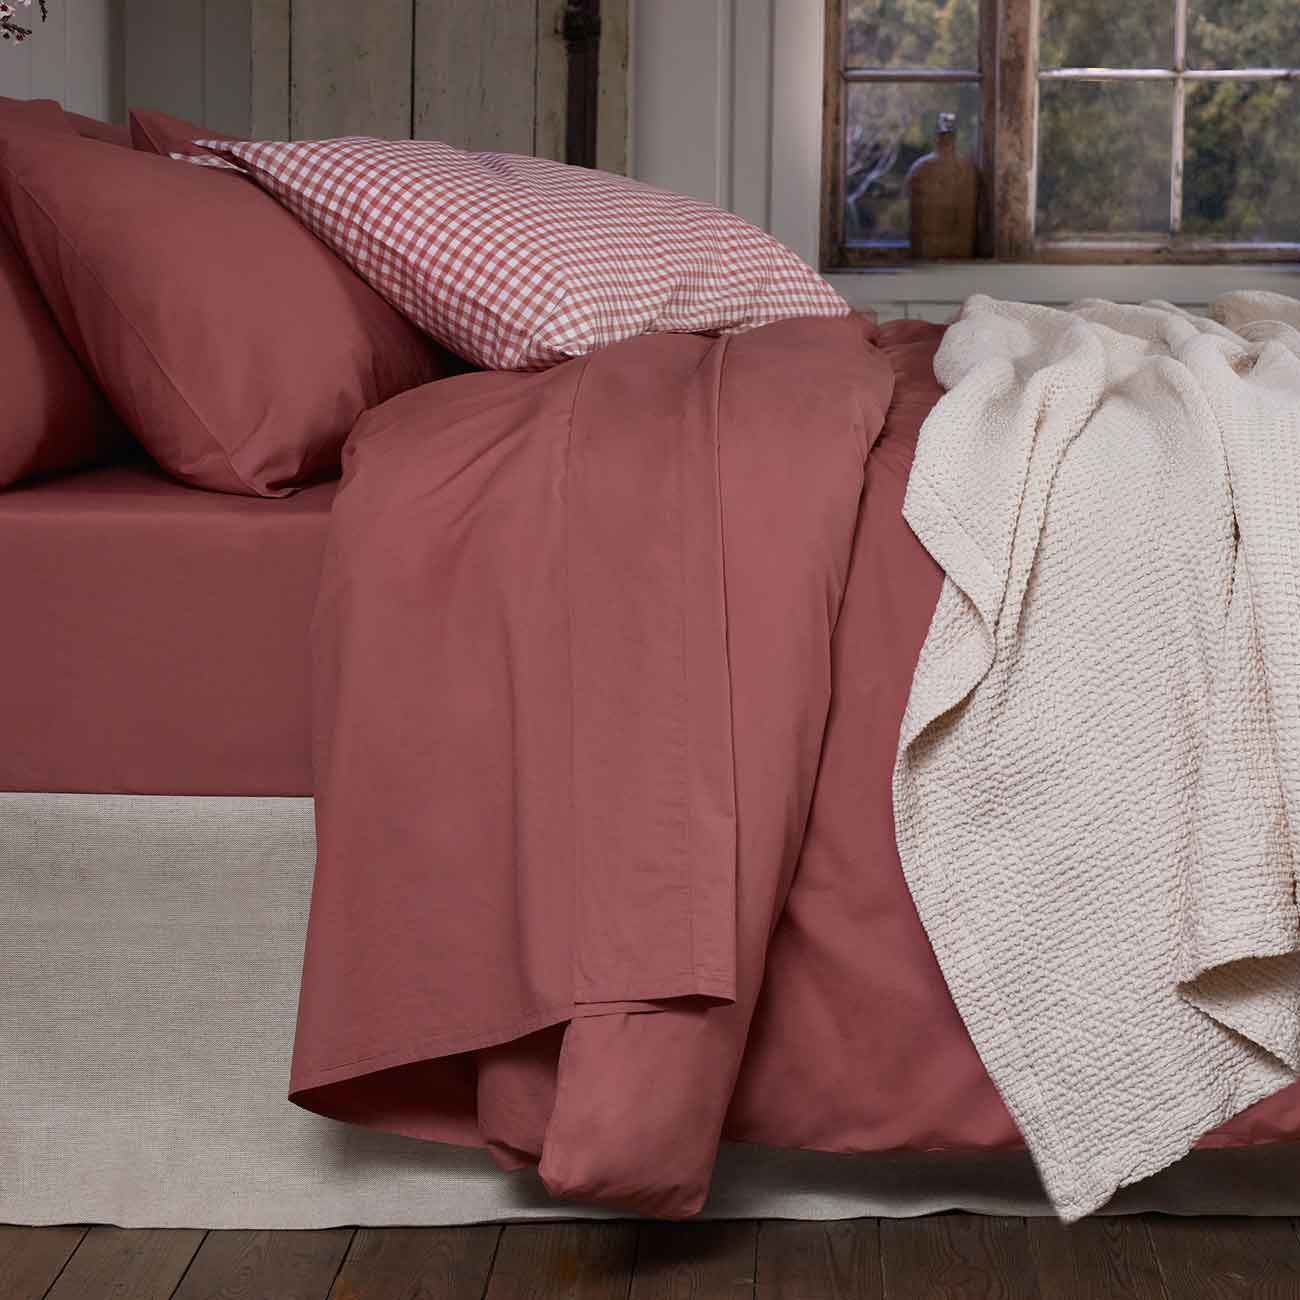 Red Dune Washed Cotton Percale and Red Dune Gingham Bedding